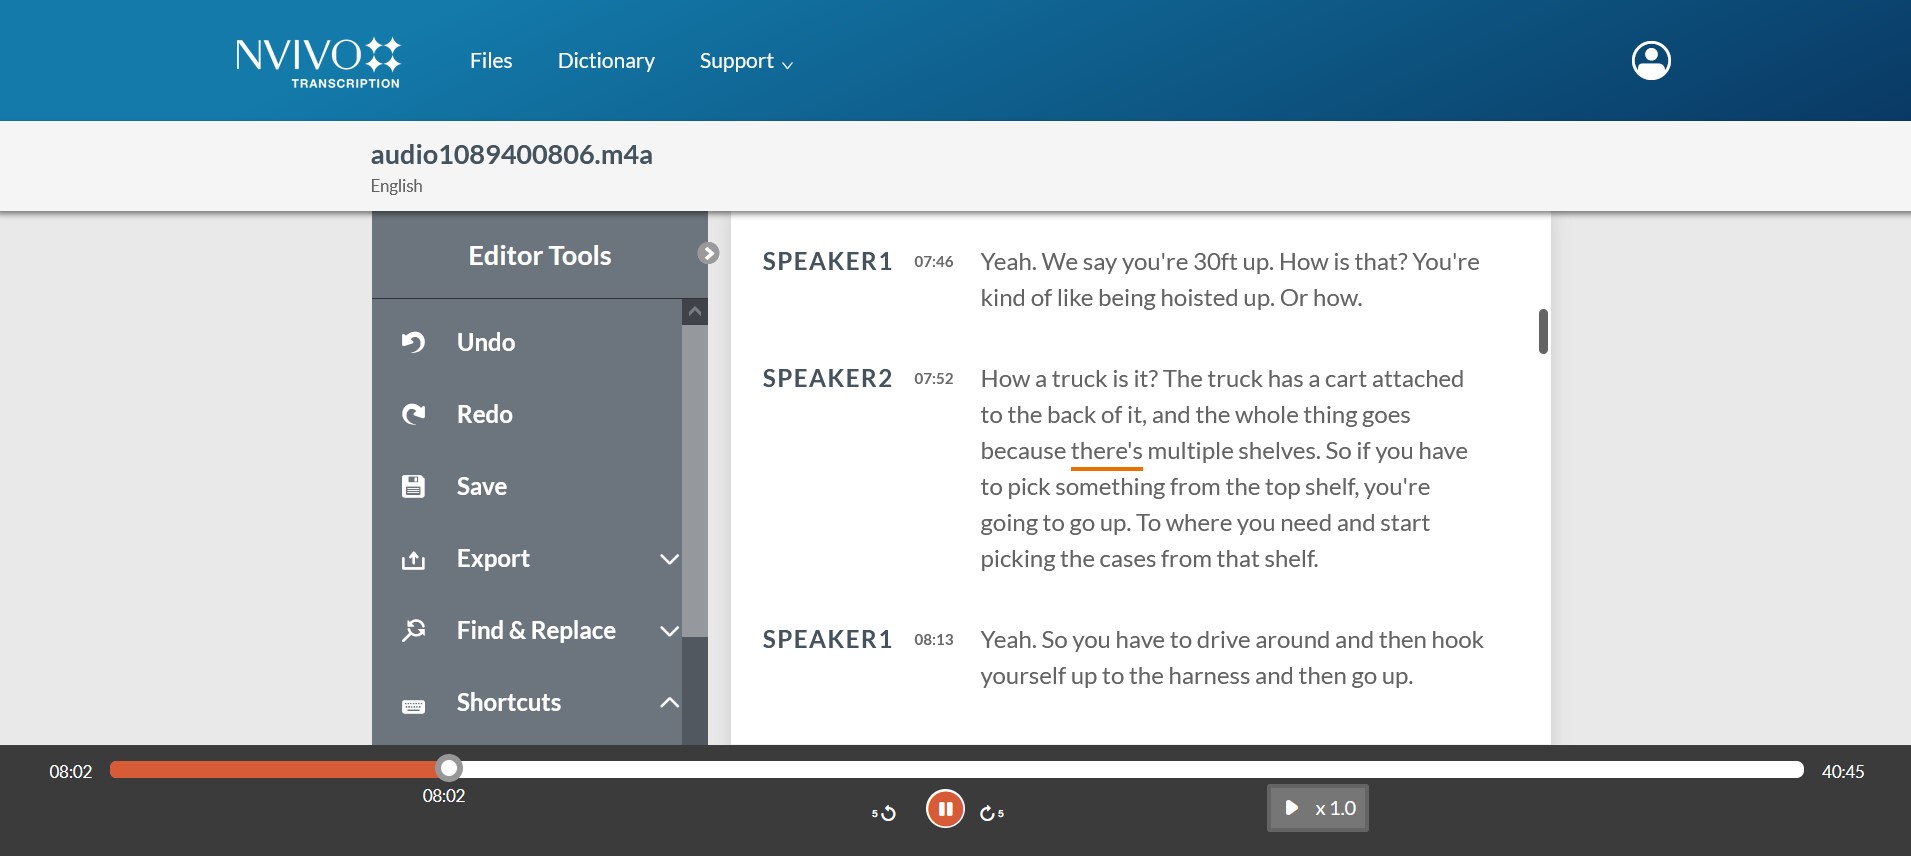 Screenshot of NVivo transcription of an interview audio file with two speakers.